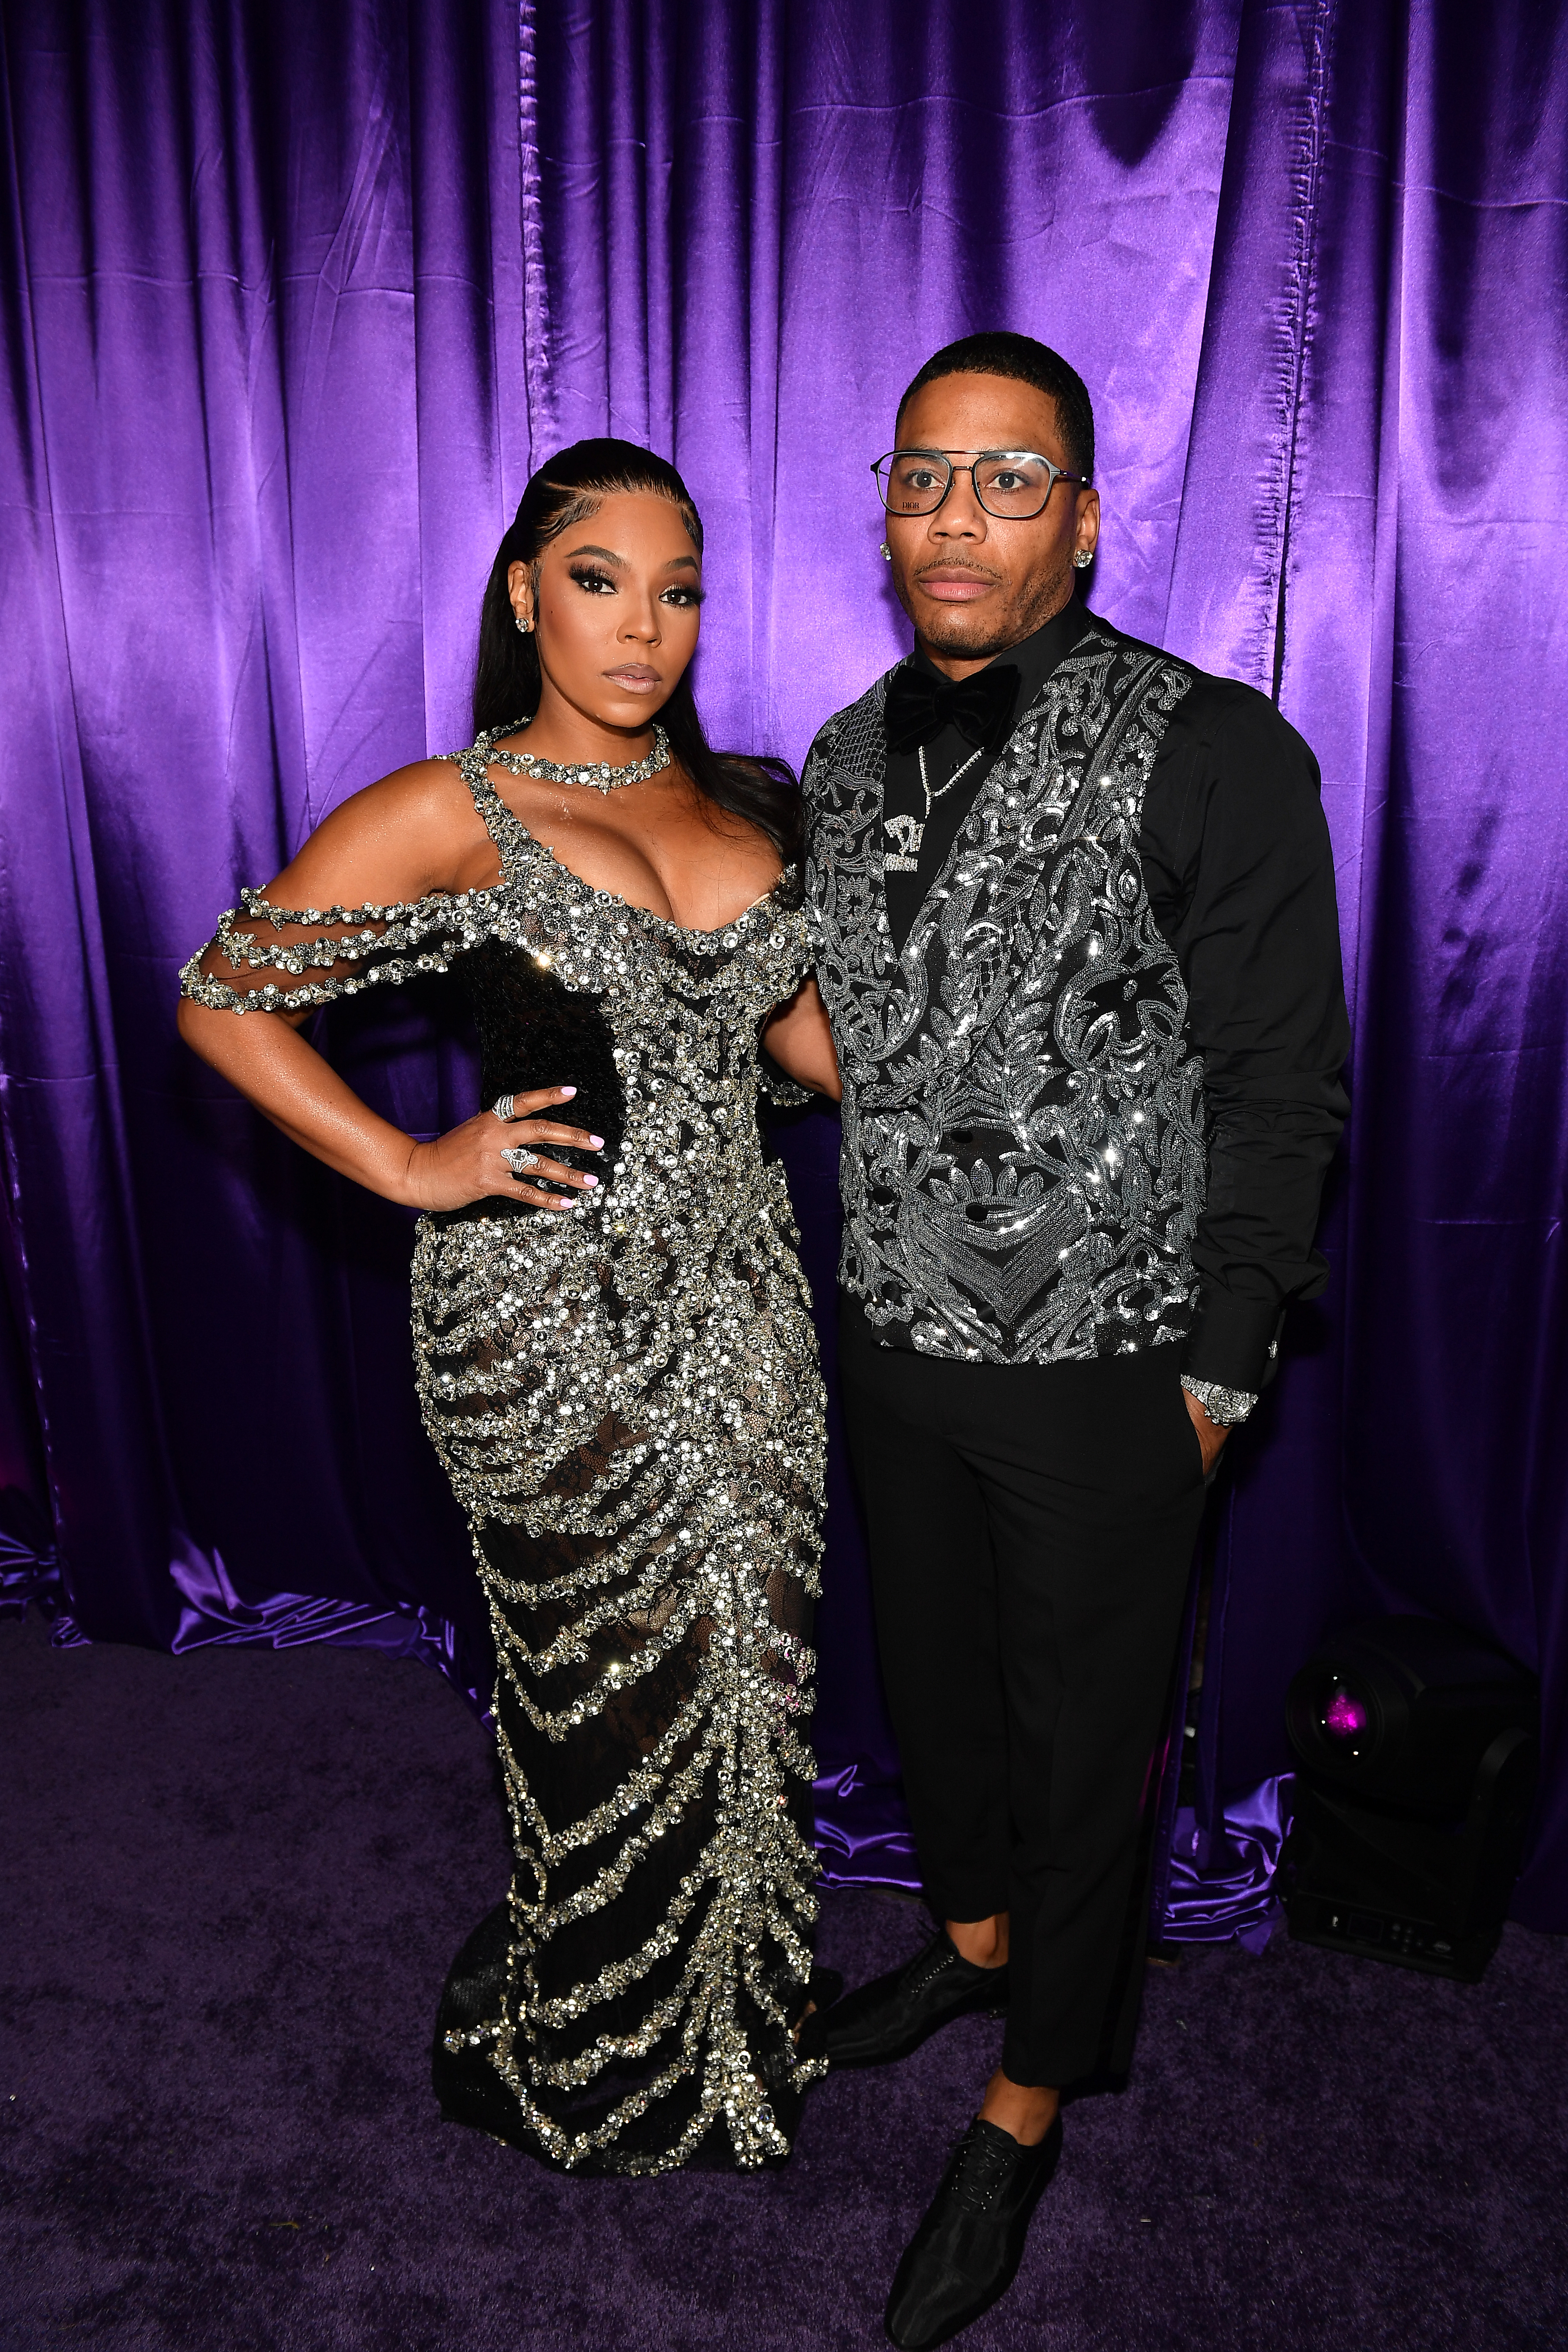 Singer Ashanti and rapper Nelly attend 3rd Annual Birthday Ball for Quality Control CEO Pierre "P" Thomas at The Fox Theatre on June 08, 2023 in Atlanta, Georgia | Source: Getty Images